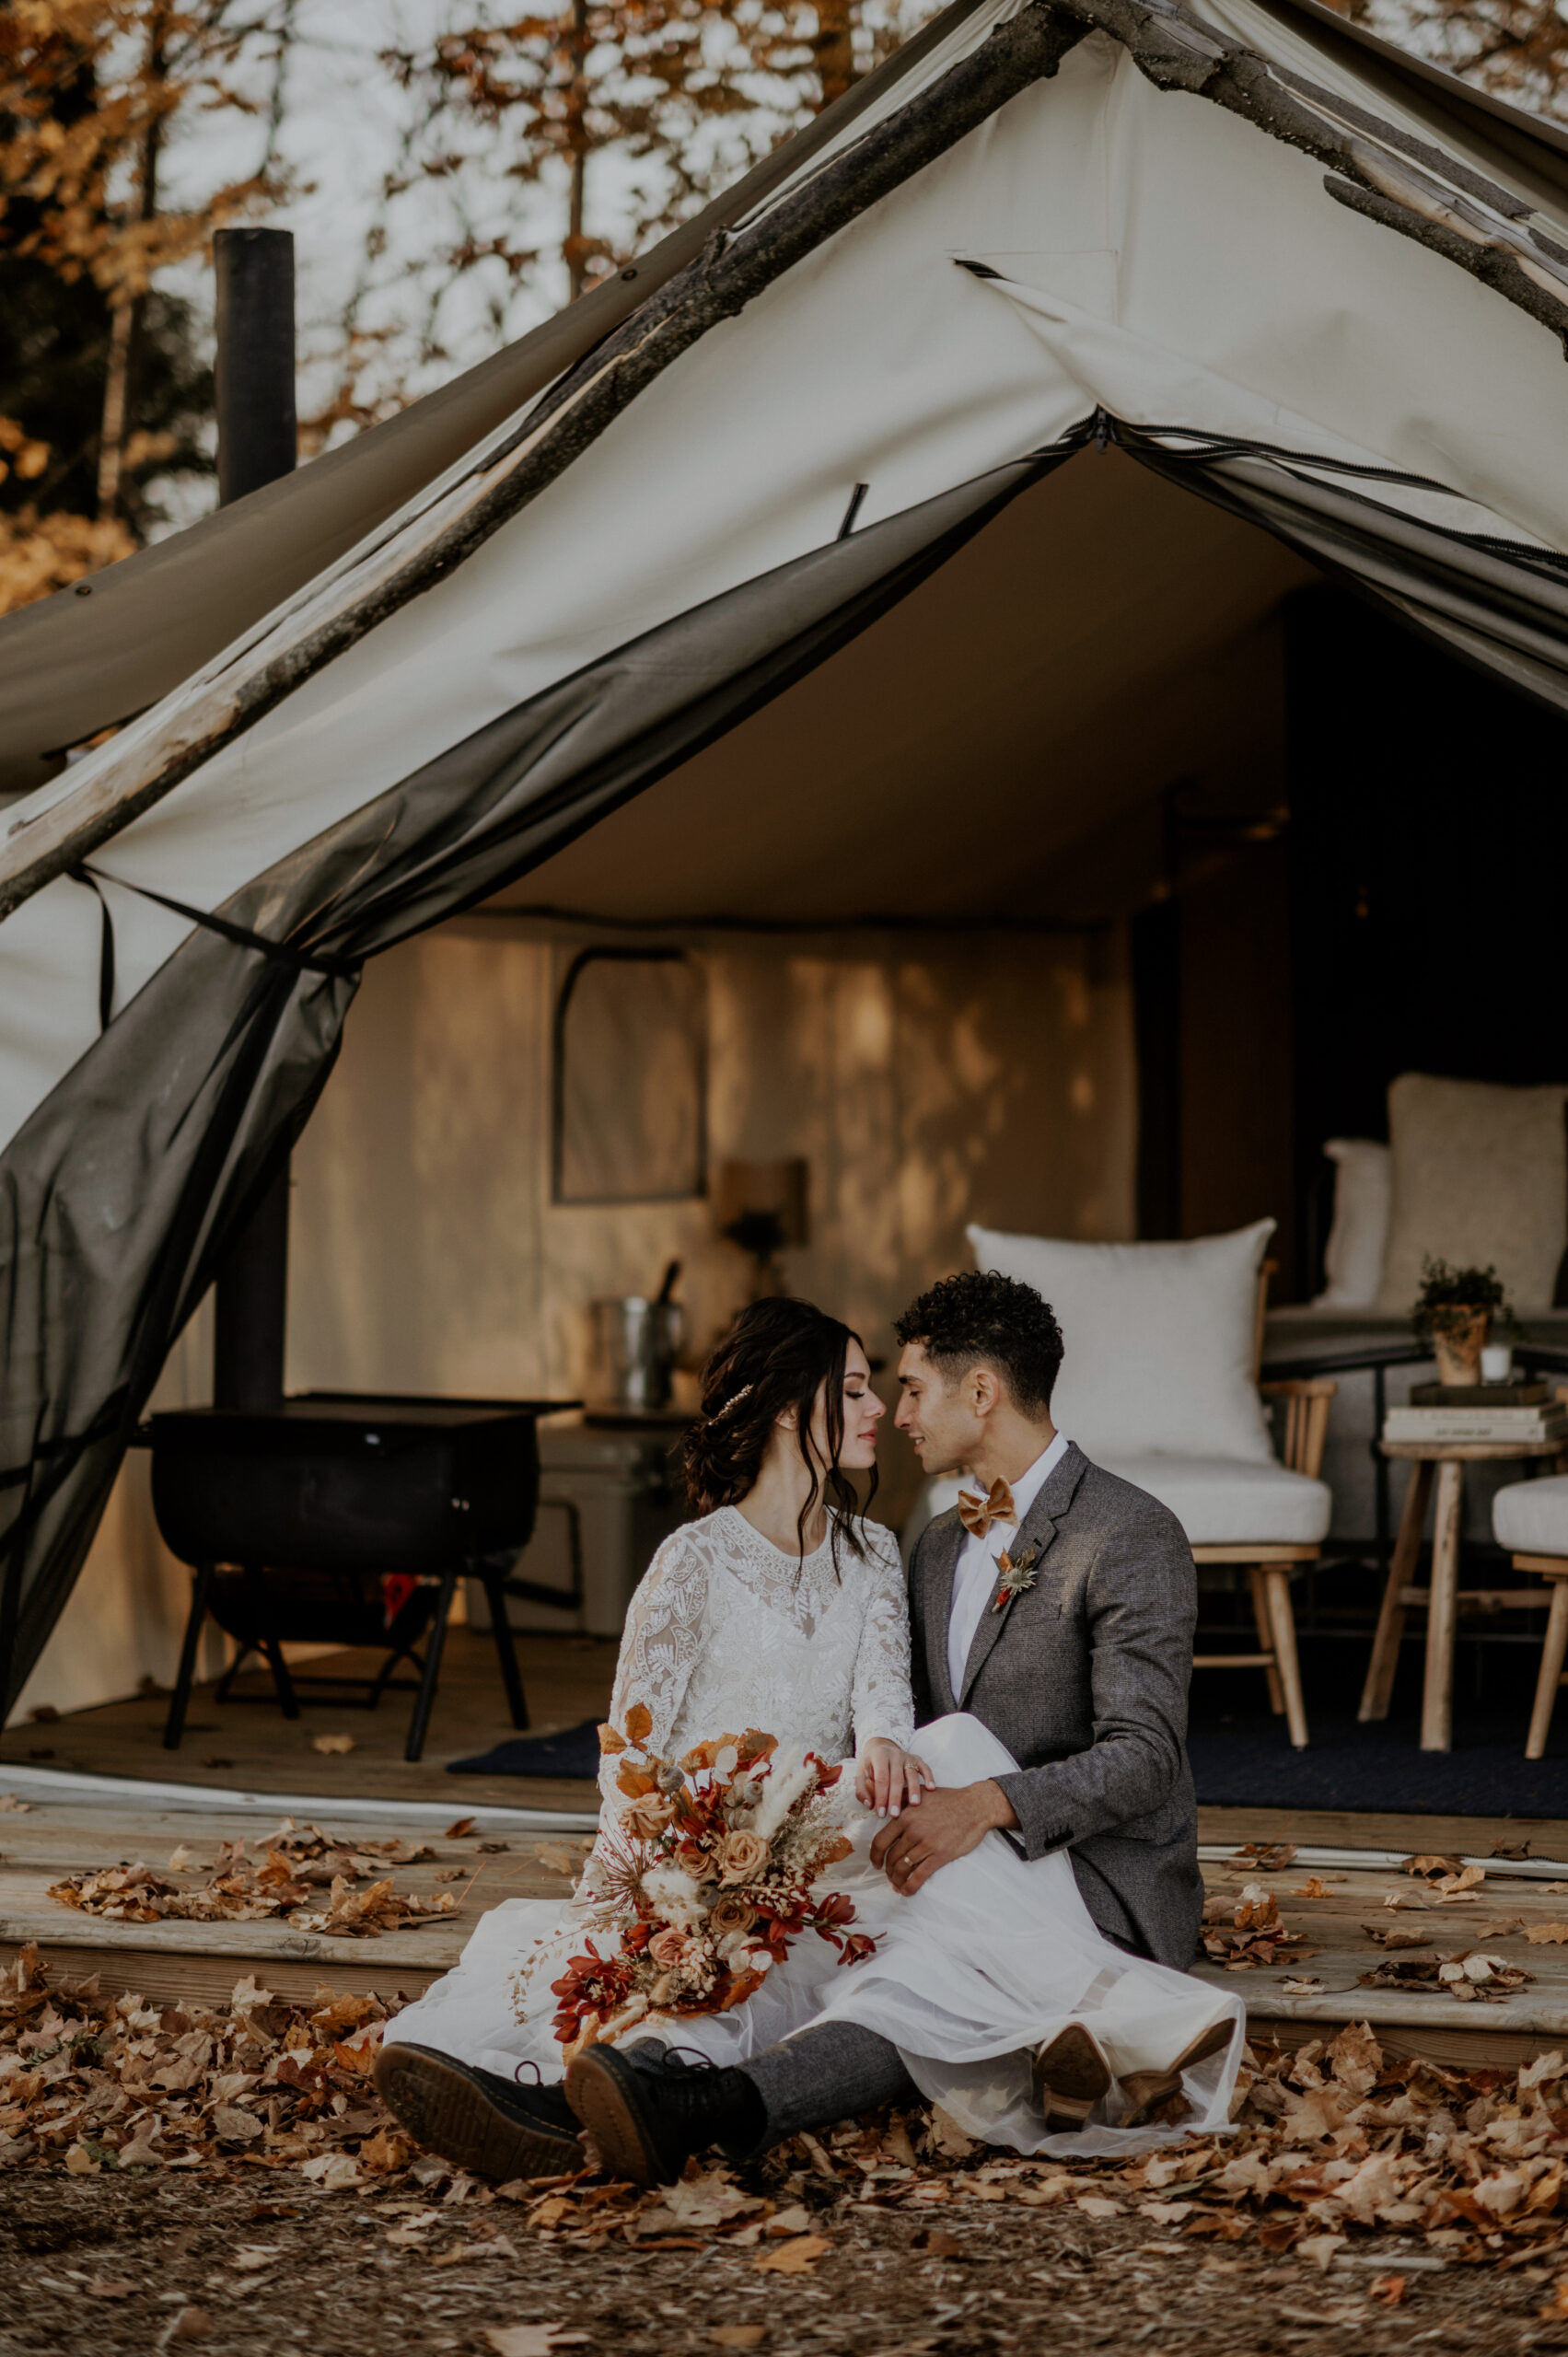 Couple Eloping at a campsite | Brit Rader Photography